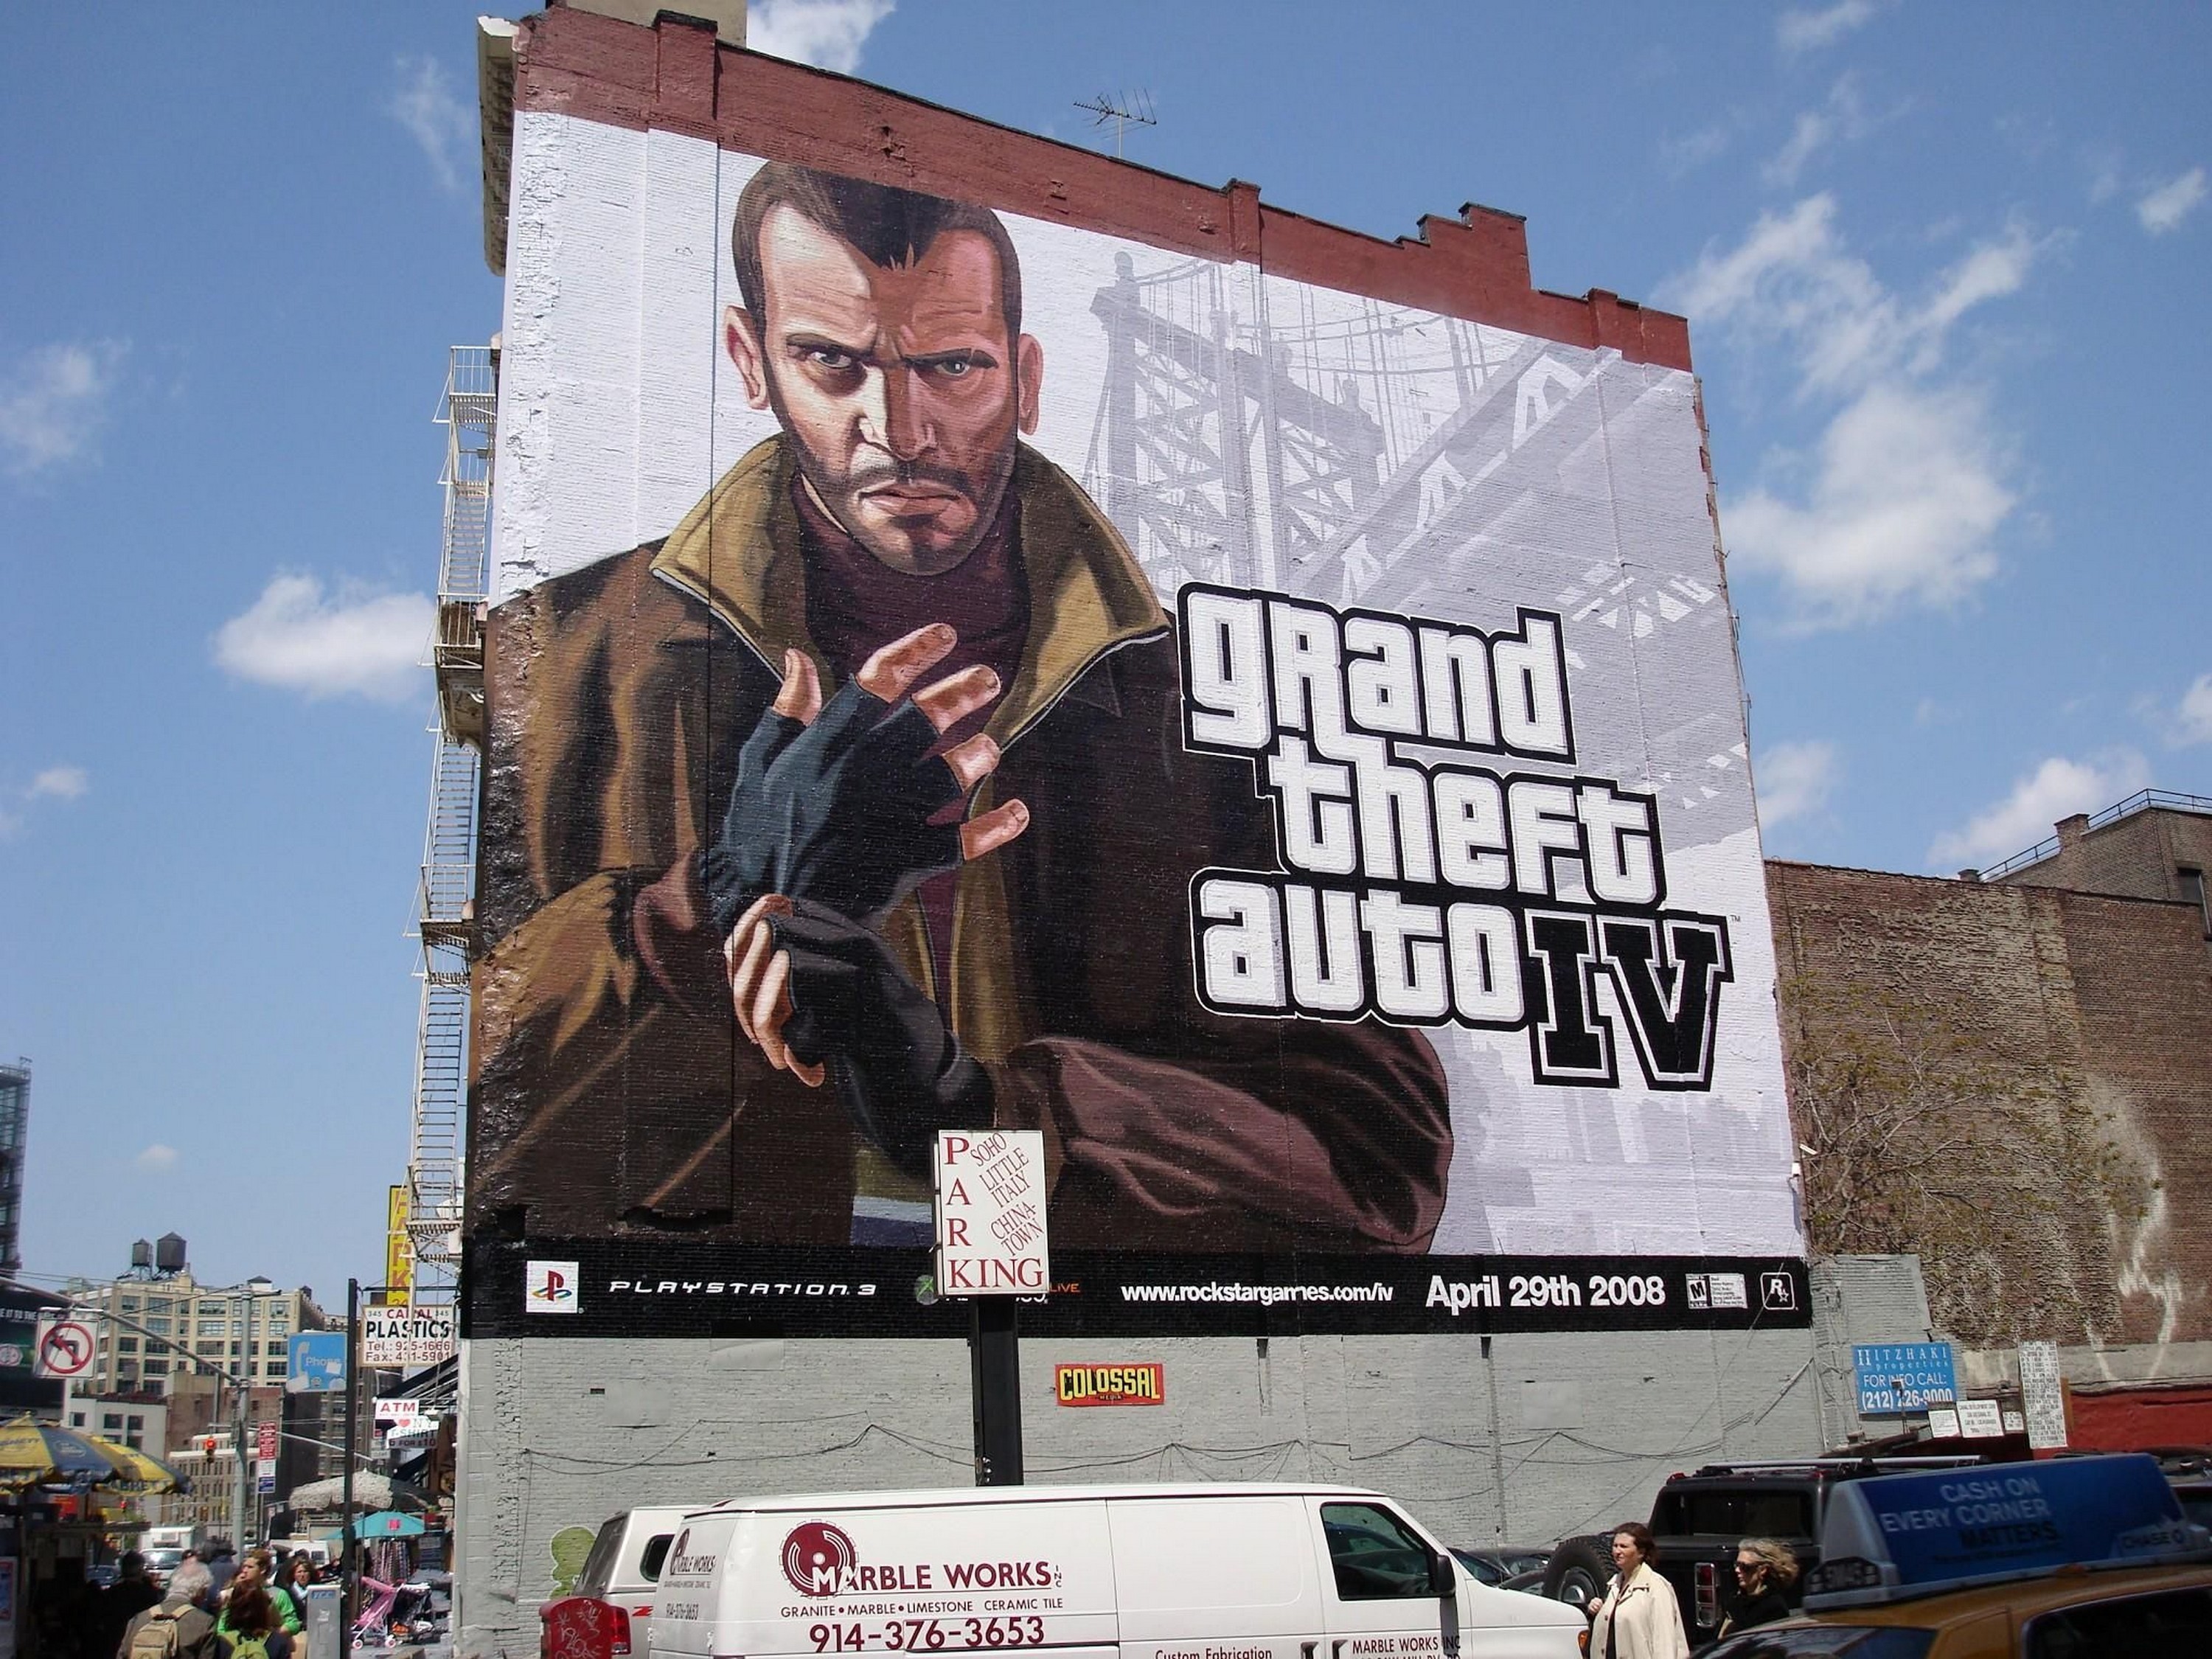 15 Years Later: Here's Why There Will Never Be Another Game Like GTA IV  Ever Again - autoevolution, gta 4 